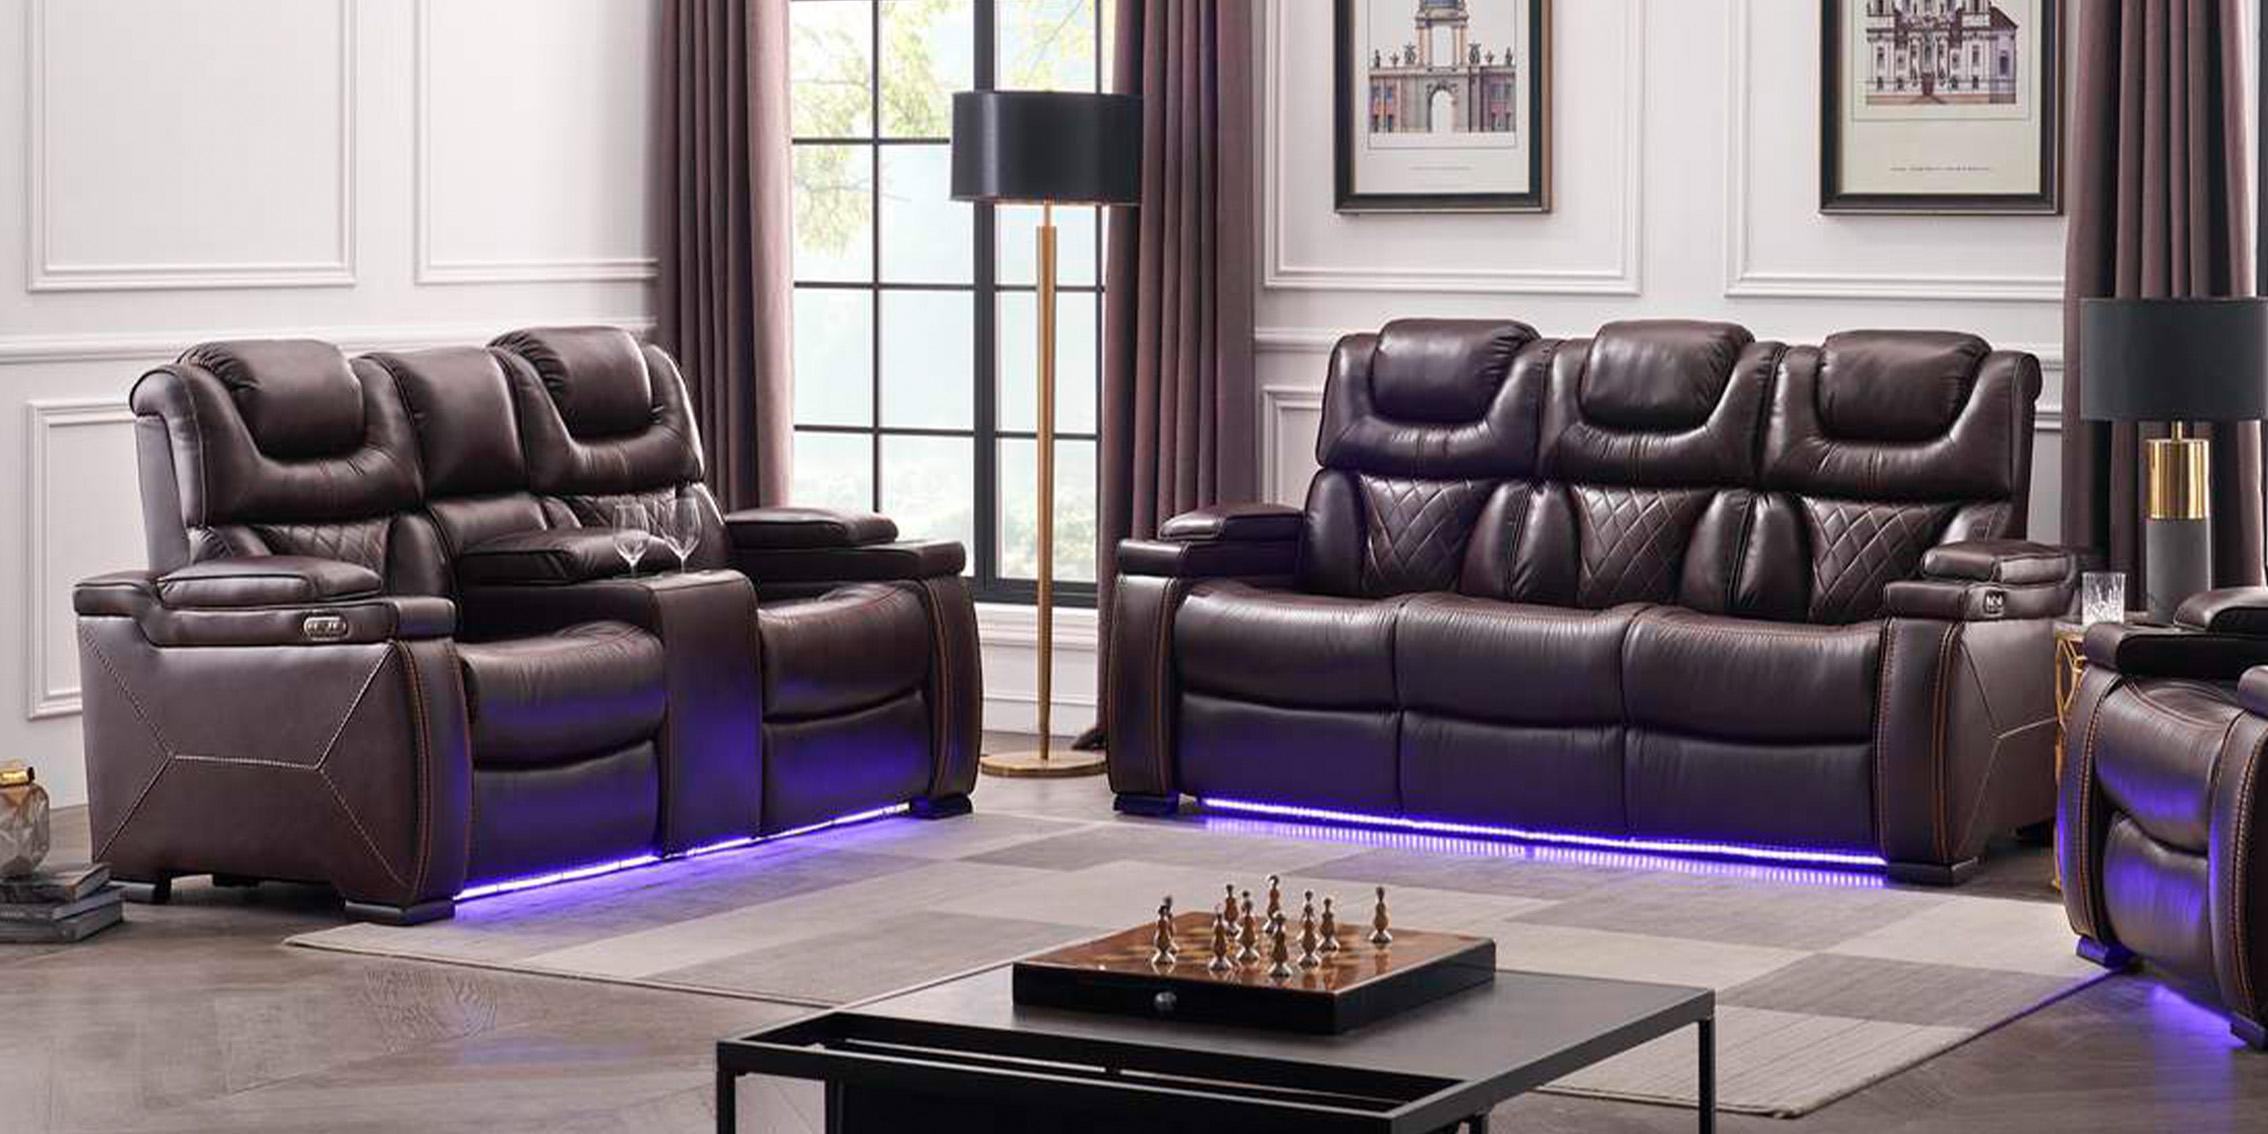 

    
Brown Eco Leather Power Recliner Sofa Set 2 LEXUS Galaxy Home Contemporary
